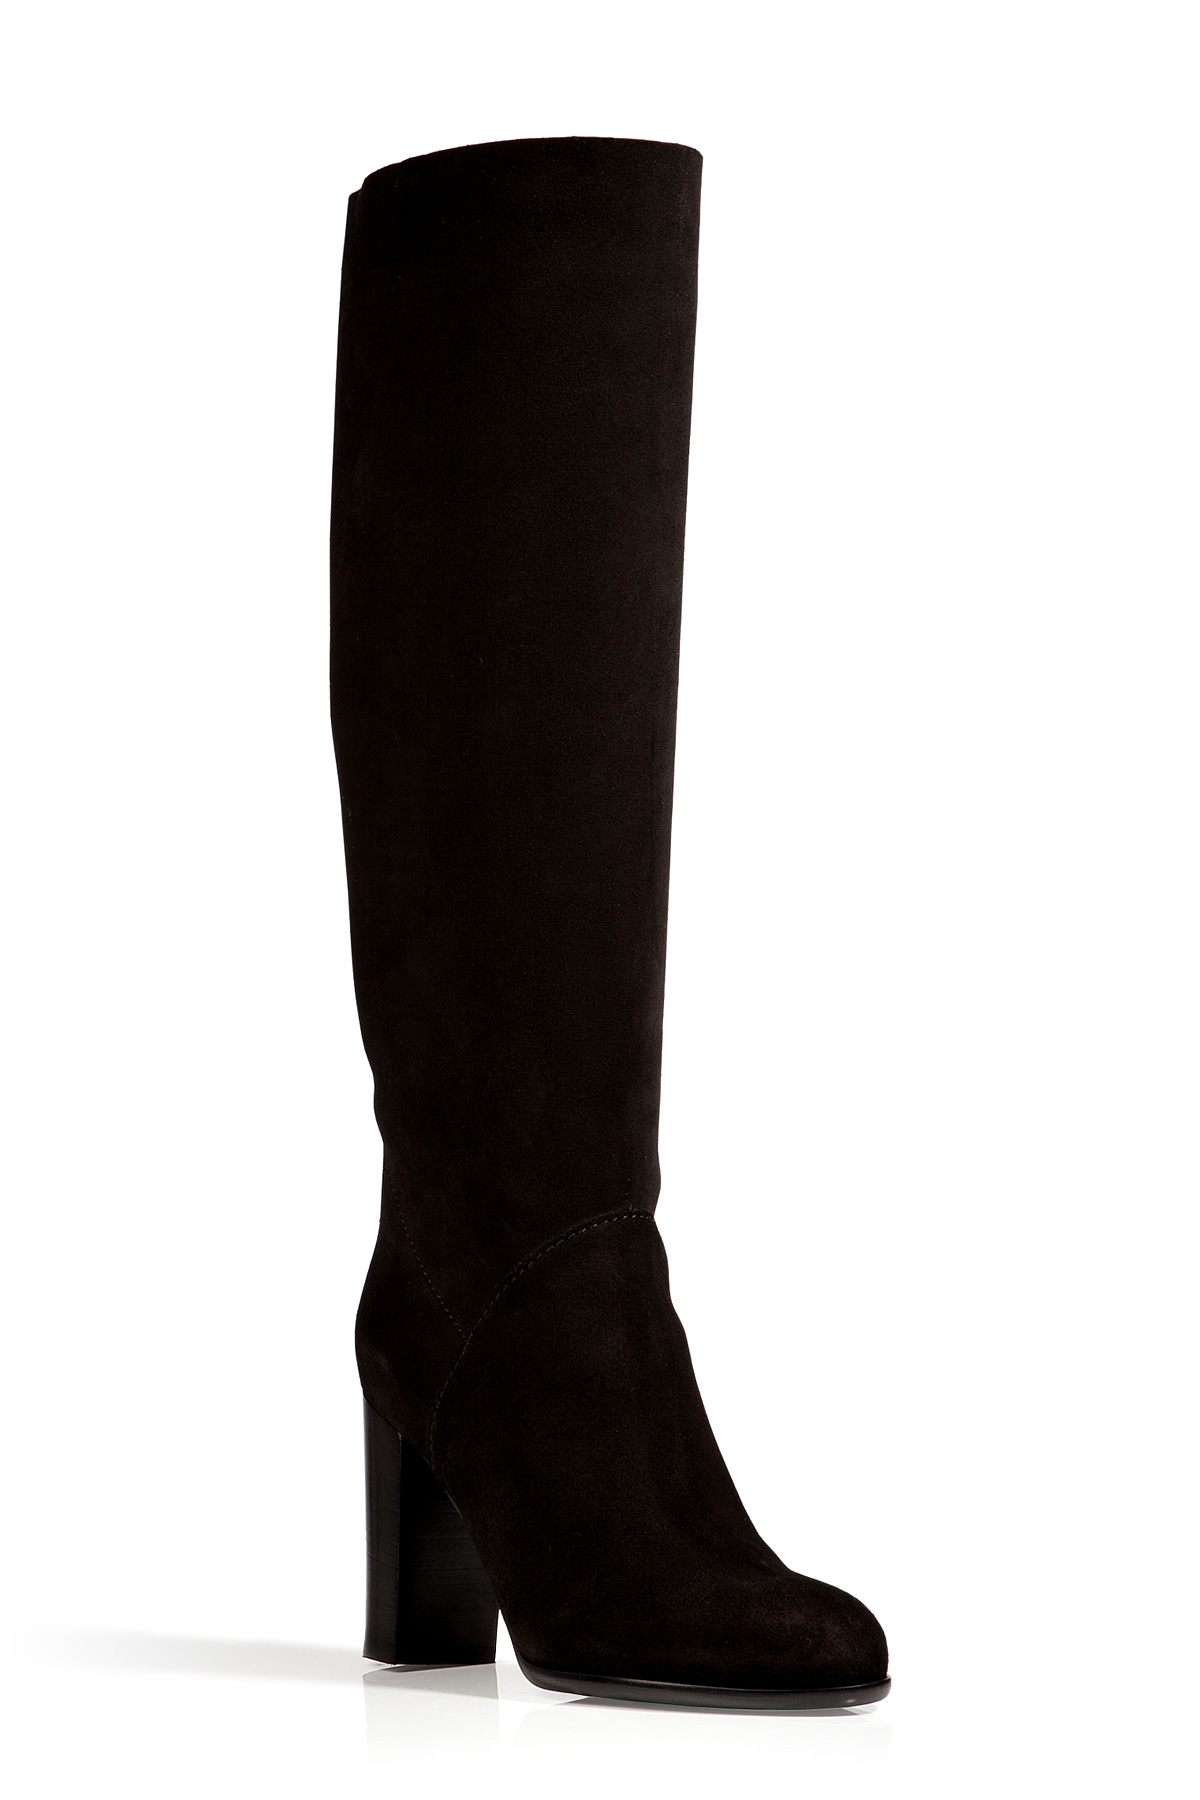 Sergio Rossi Suede Tall Boots In Reversed Black in Black | Lyst